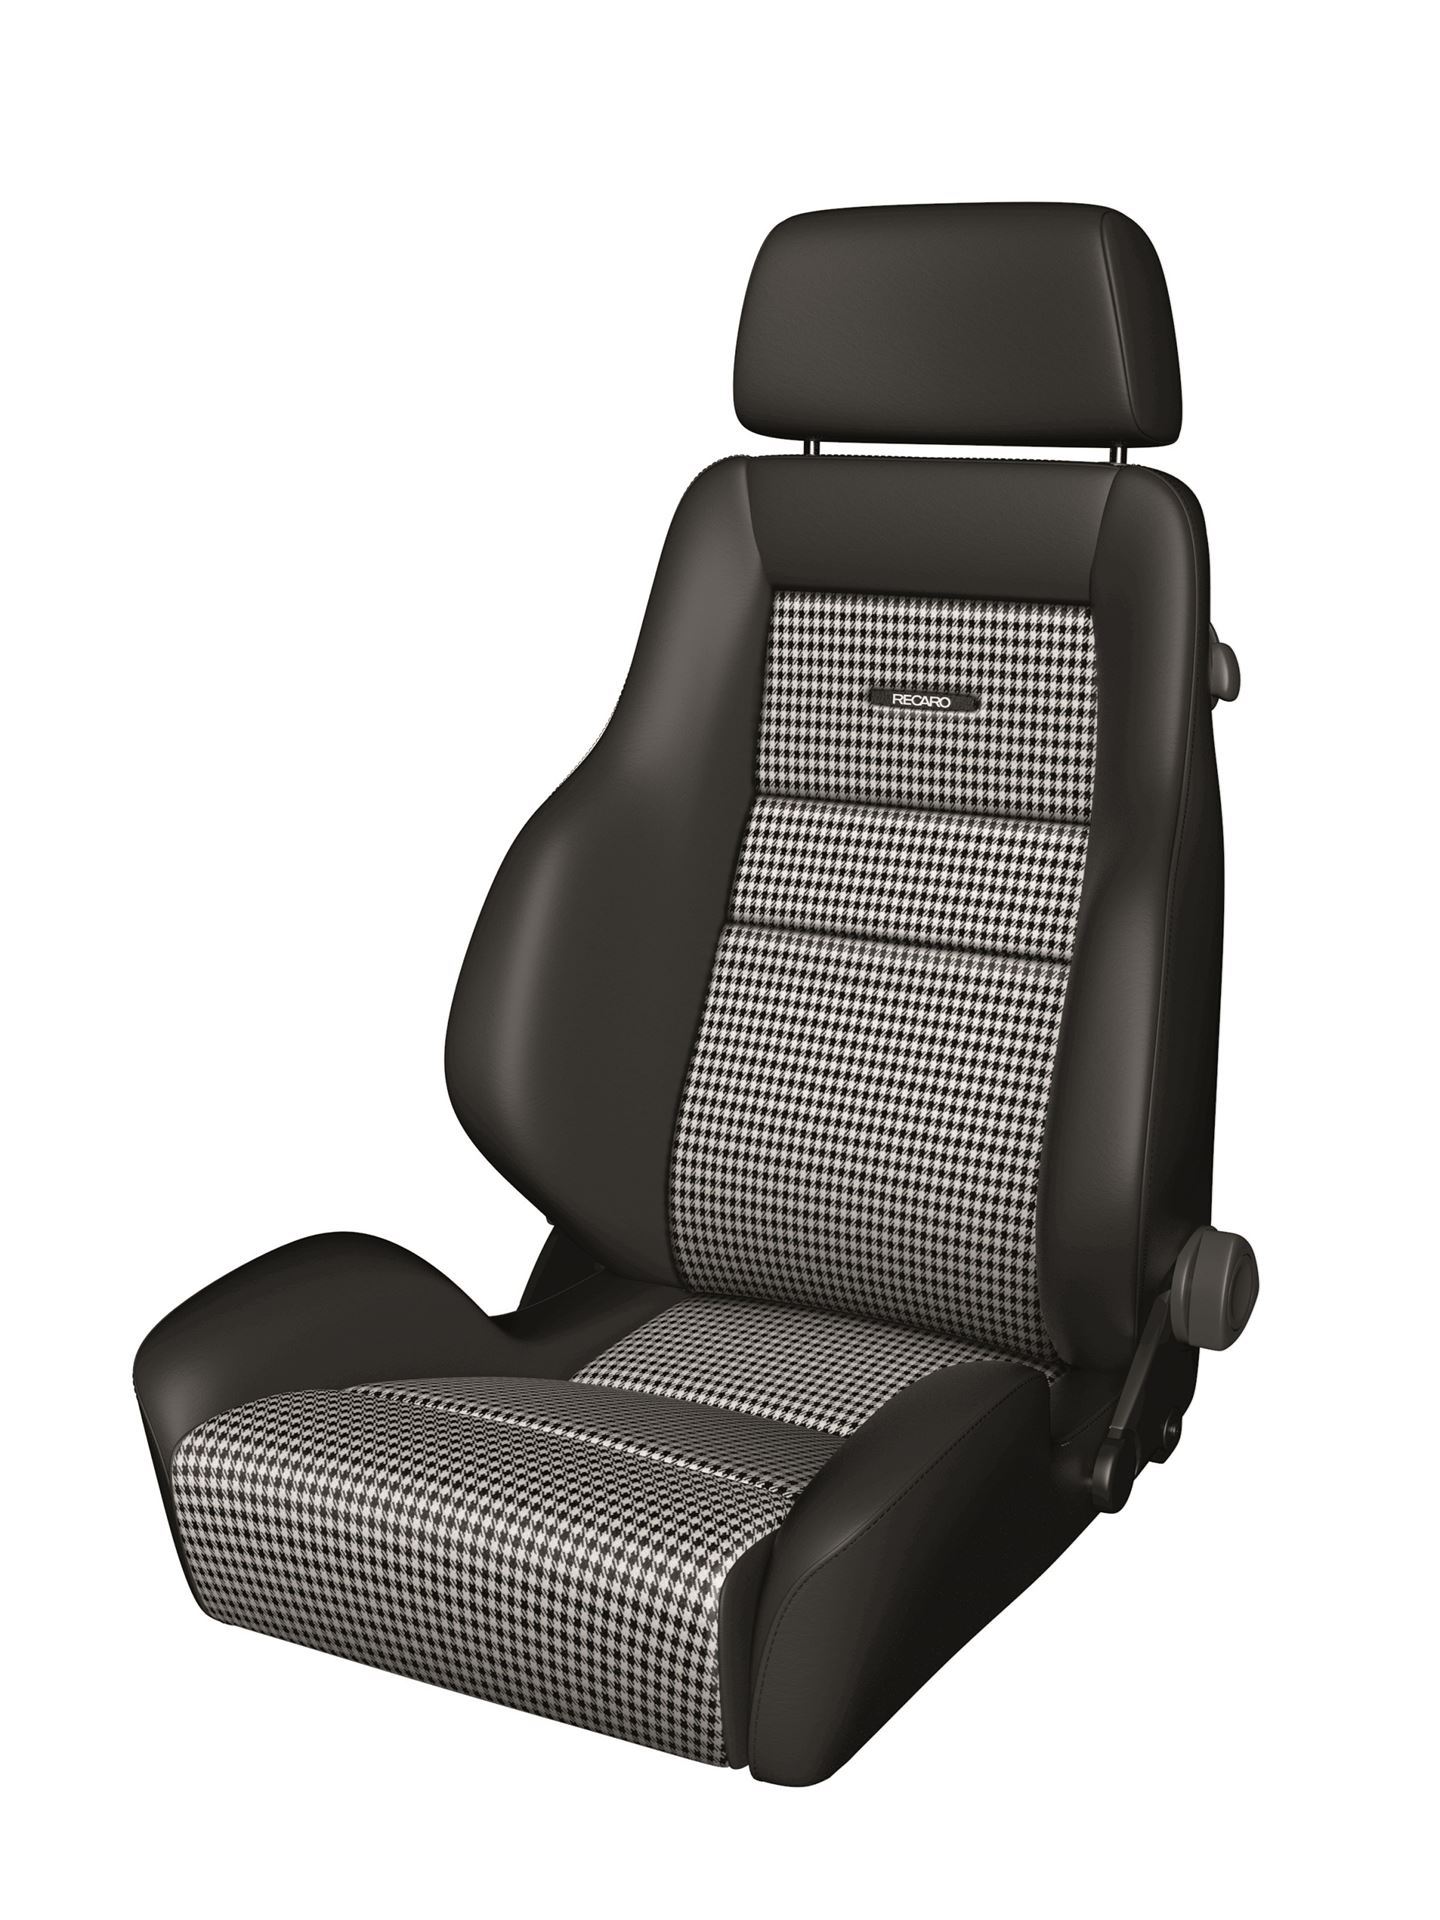 Capital and Vision > Seating, Vision Accessories for Hardworking Environments. RECARO Classic